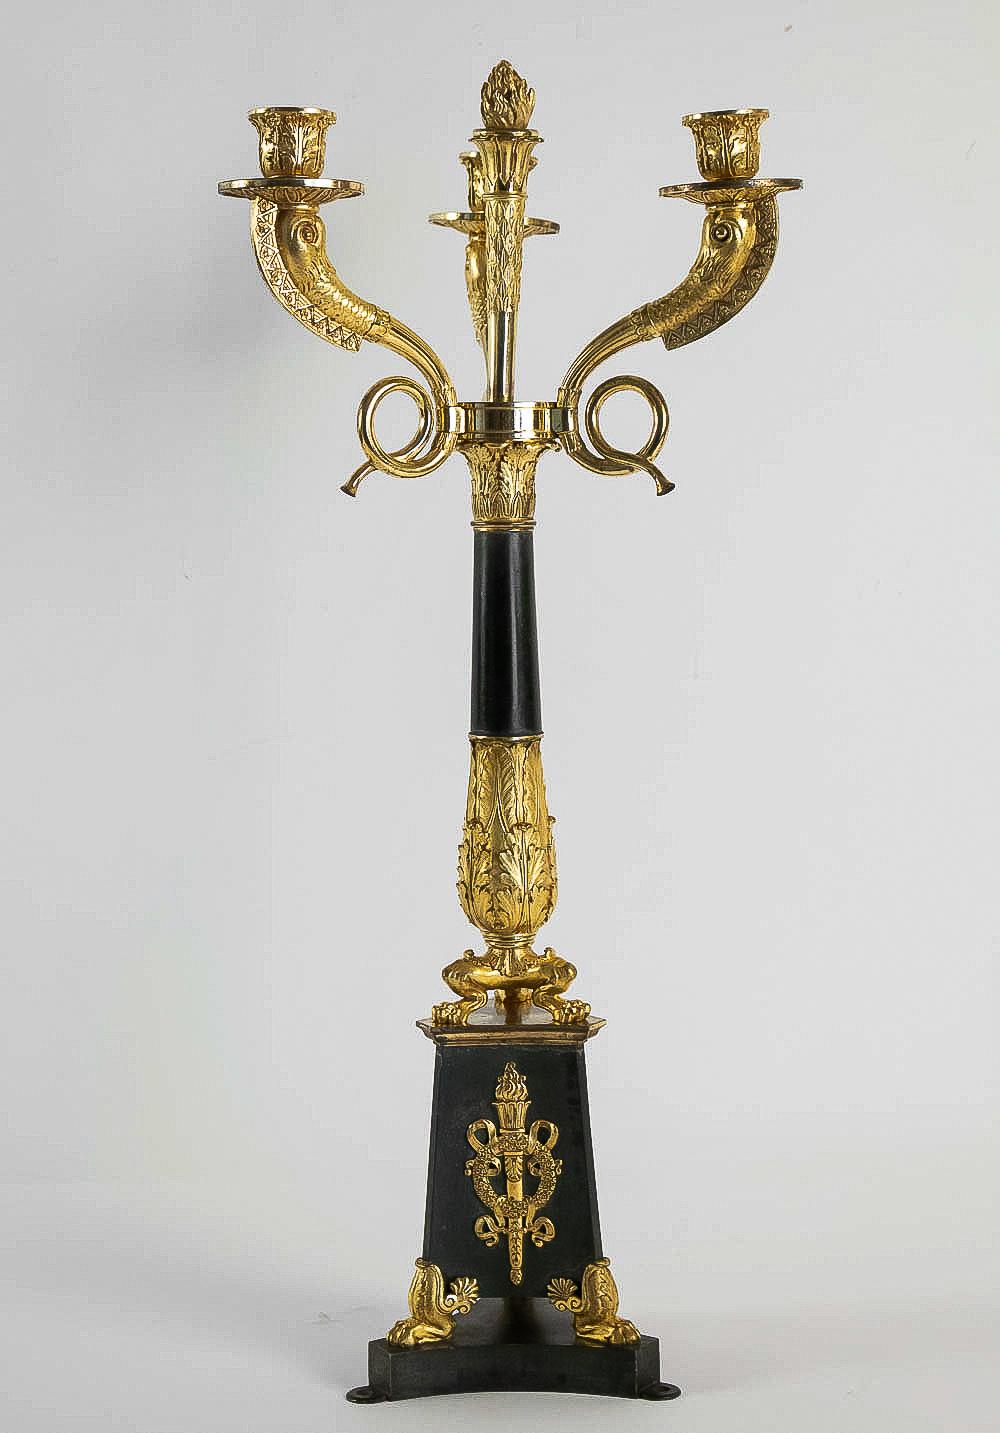 Gilt Large Pair of French Empire or Restauration Period Candelabra, circa 1815-1830 For Sale